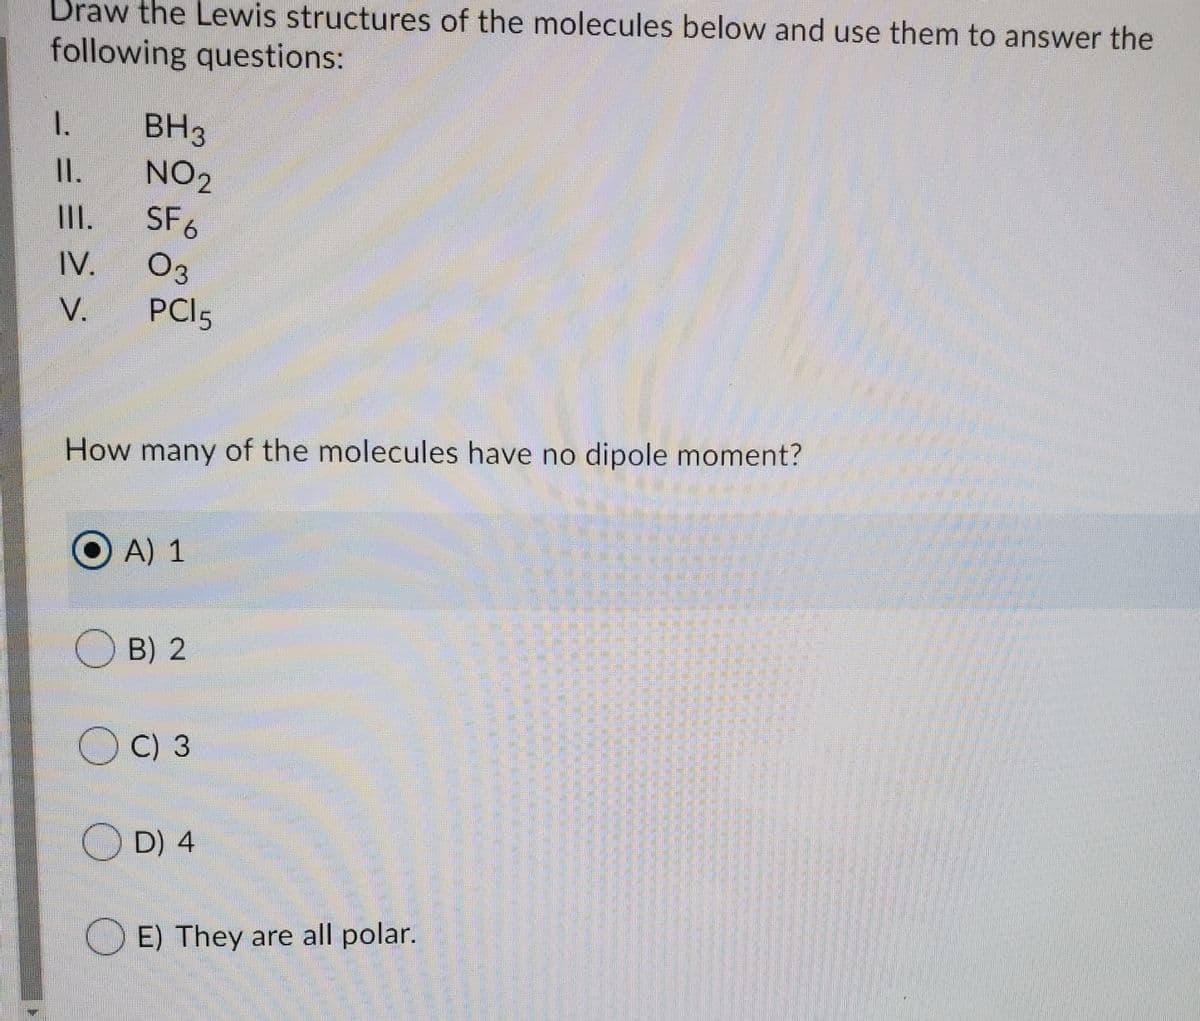 Draw the Lewis structures of the molecules below and use them to answer the
following questions:
BH3
NO2
1.
I.
II.
SF6
IV.
Оз
V.
PCI5
How many of the molecules have no dipole moment?
O A) 1
O B) 2
OC) 3
O D) 4
O E) They are all polar.
